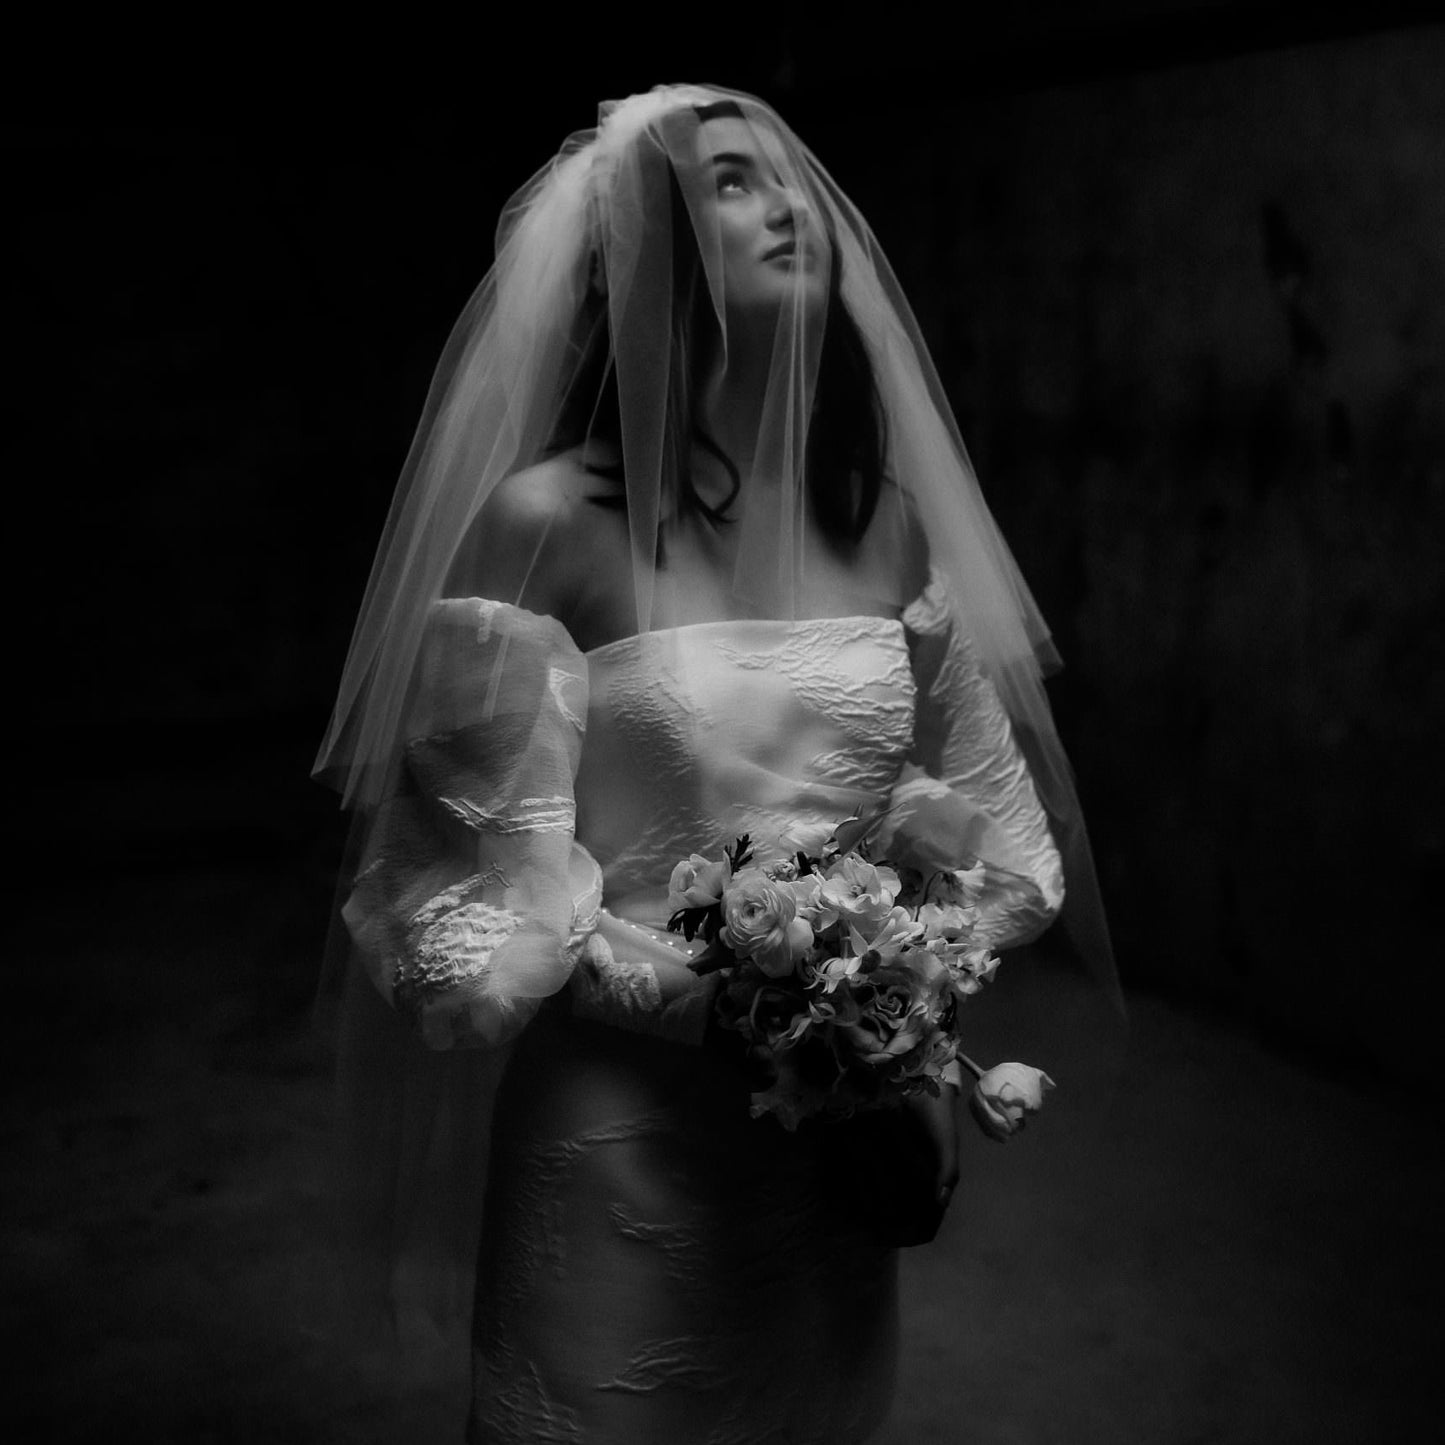 Striking photograph in black and white of a dark haired young woman wearing a veil and wedding dress and looking upwards